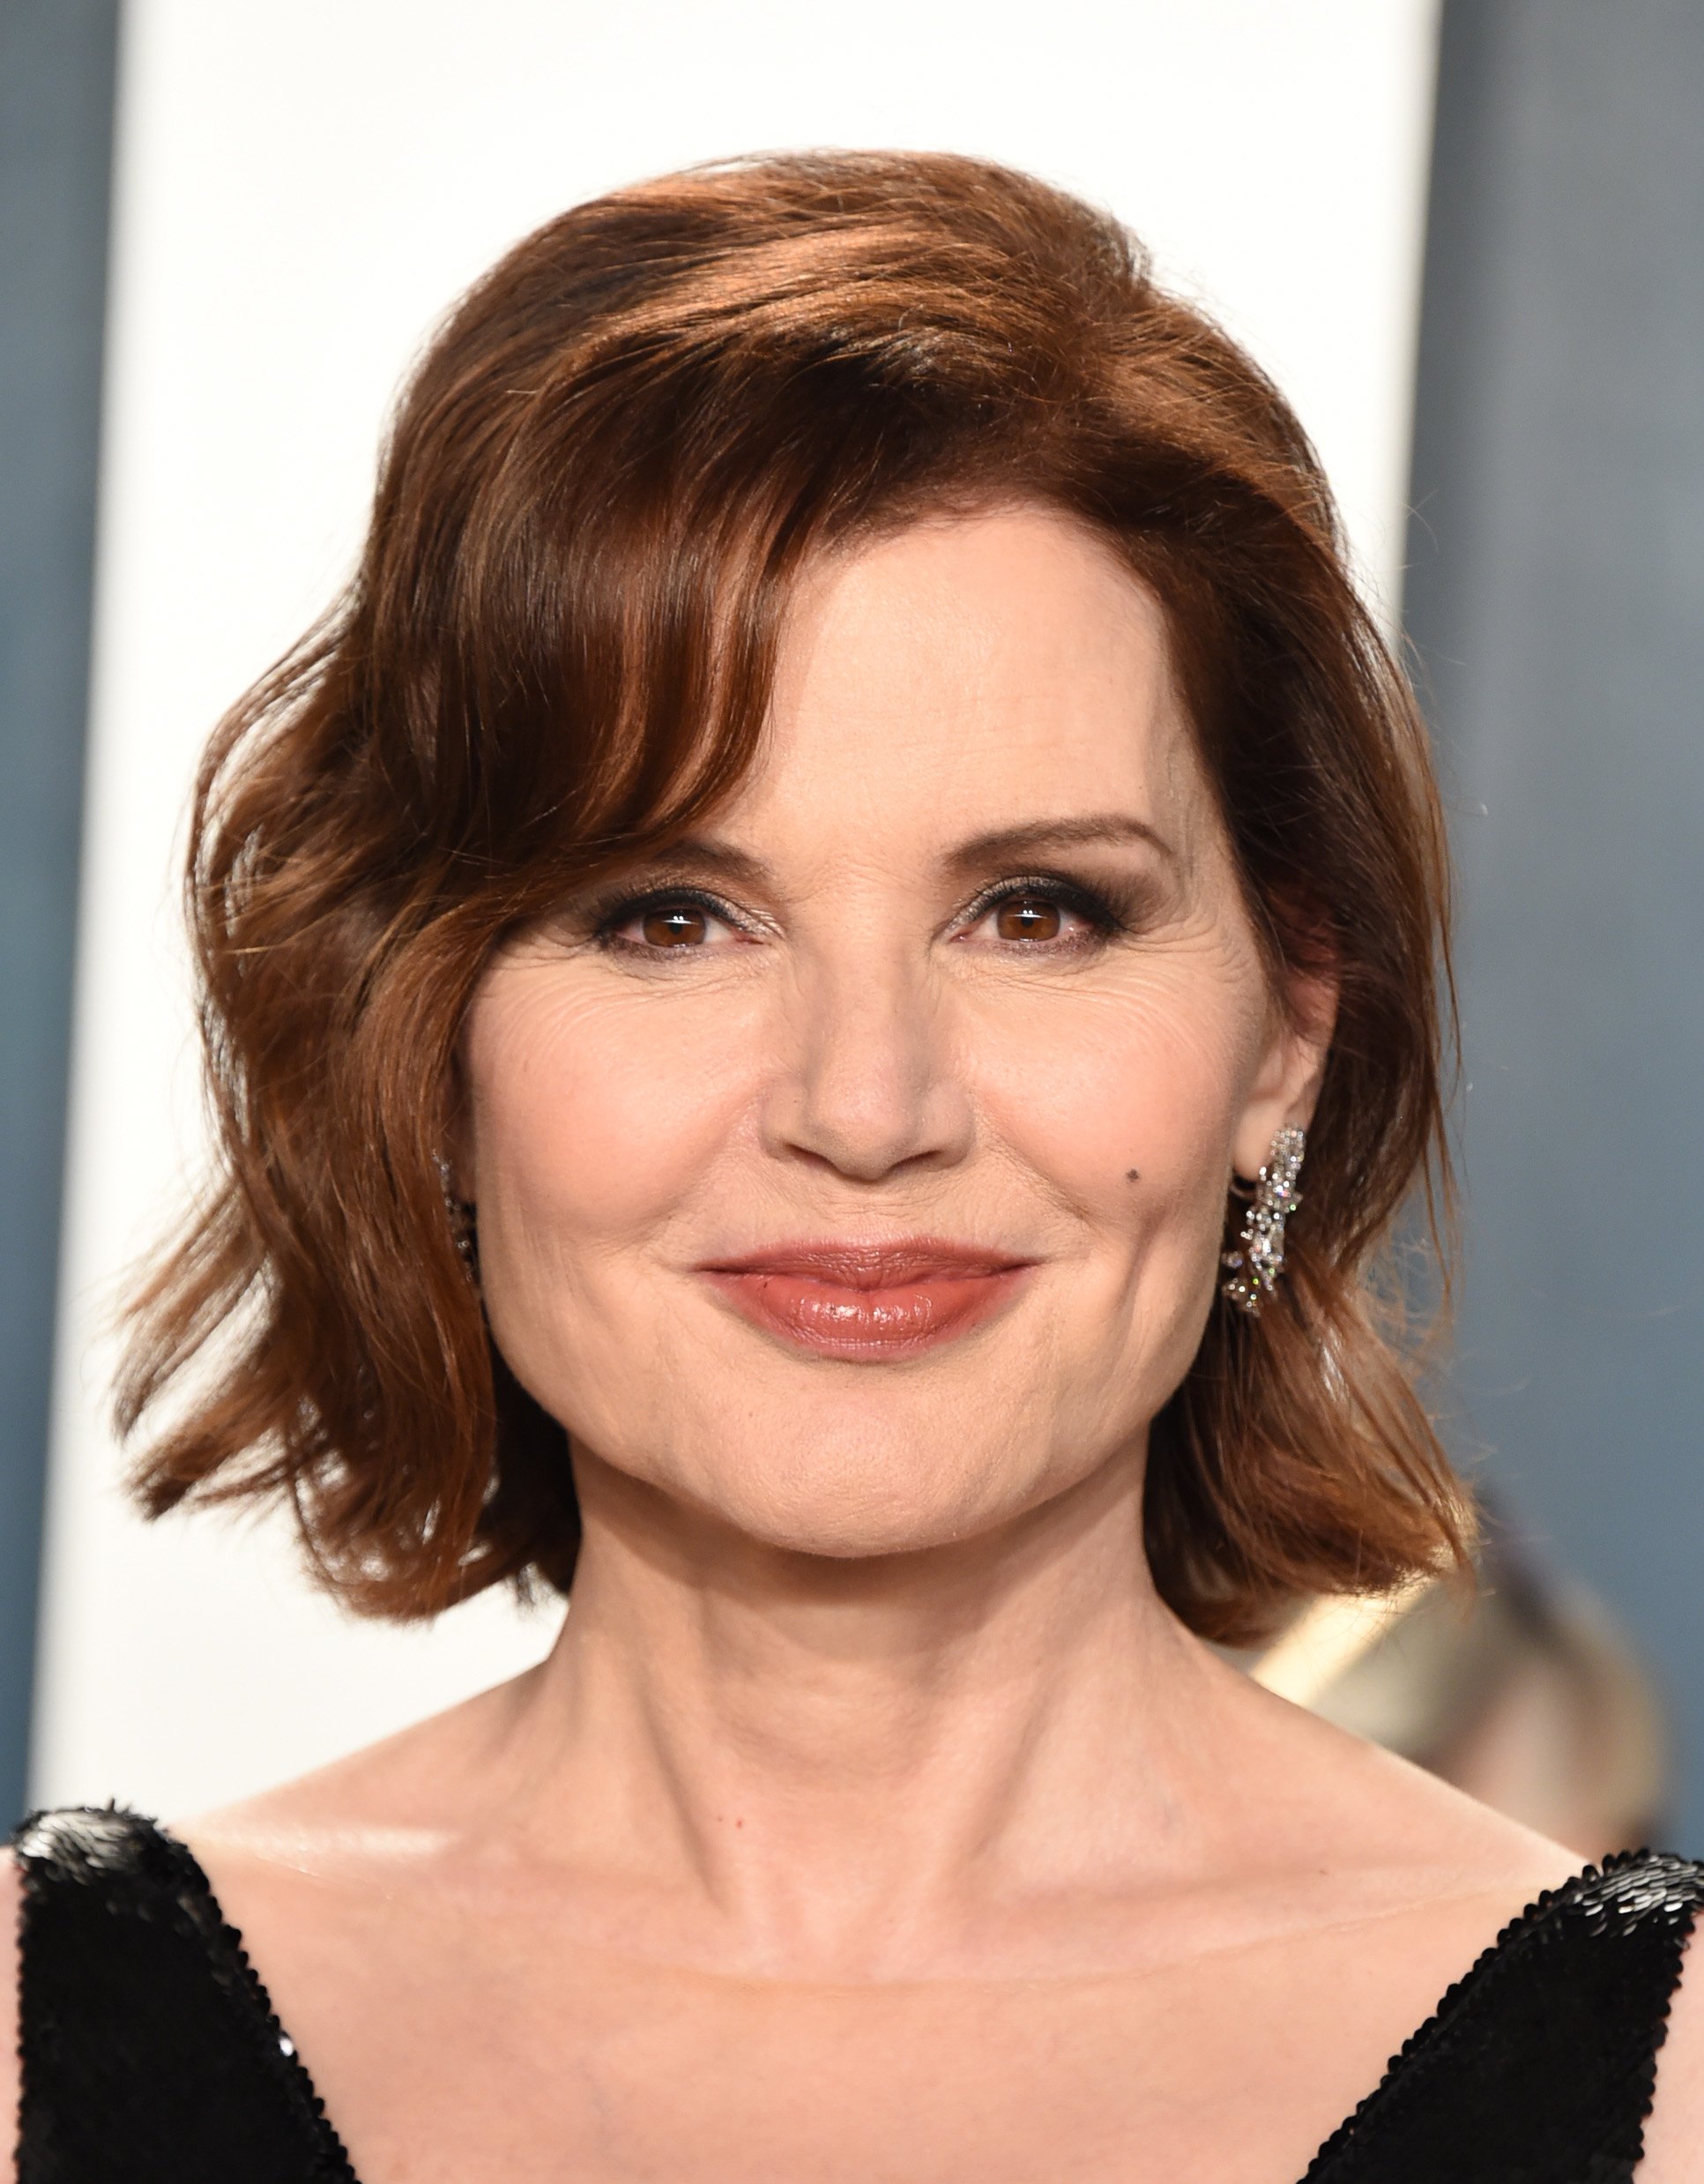 Actress Geena Davis during the 2020 Vanity Fair Oscar Party at Wallis Annenberg Center for the Performing Arts on February 09, 2020 in Beverly Hills, California. / Source: Getty Images